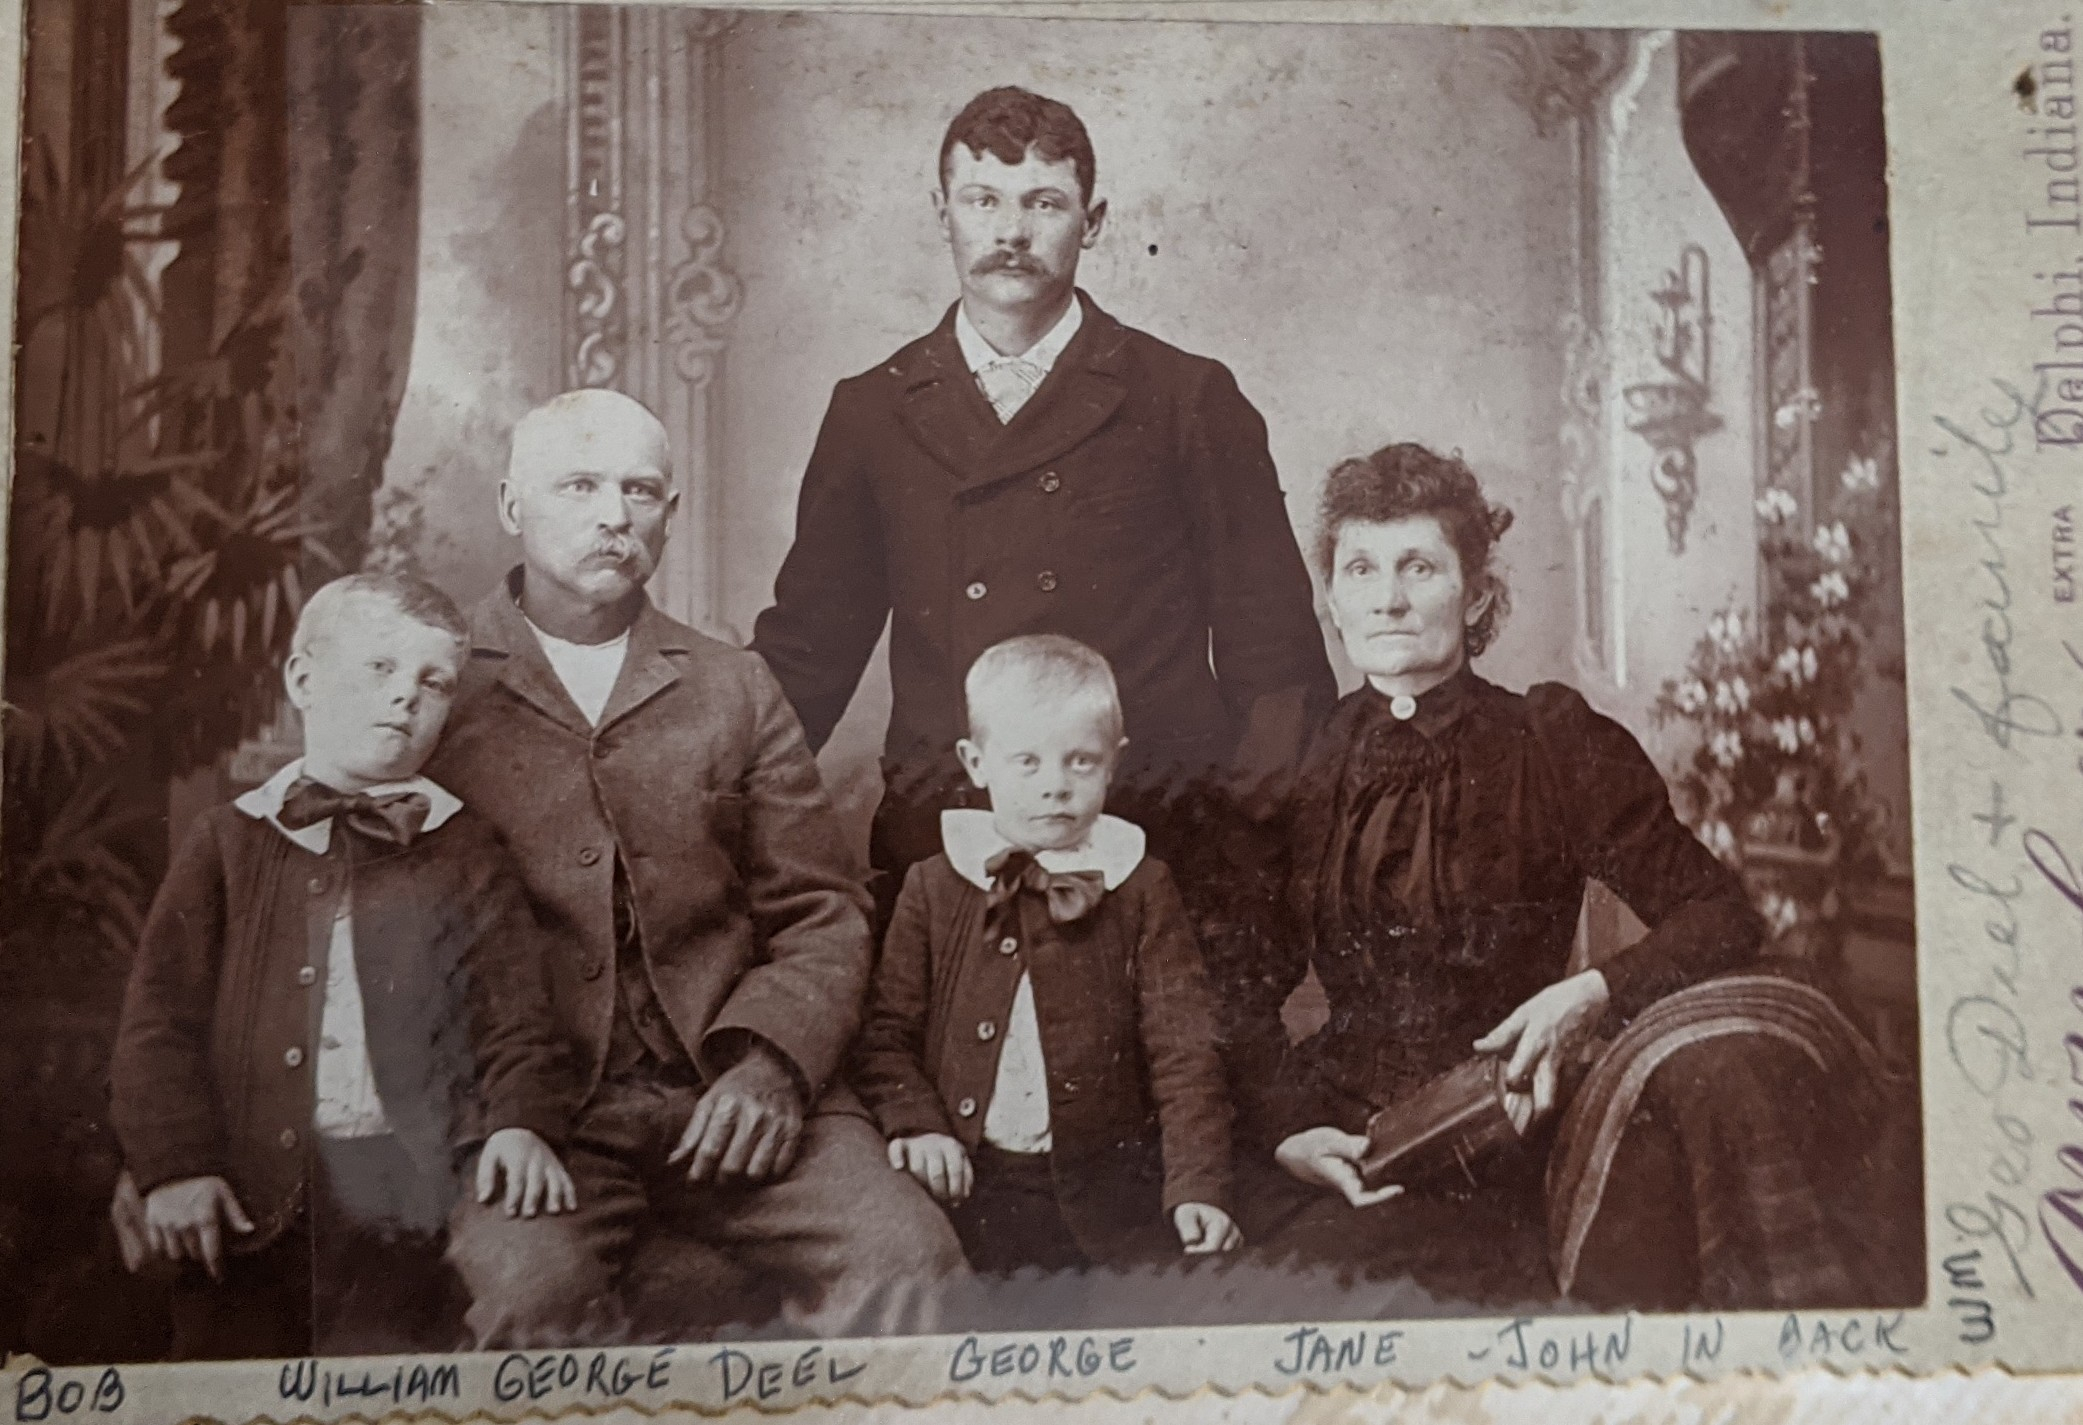 William George Deel and family